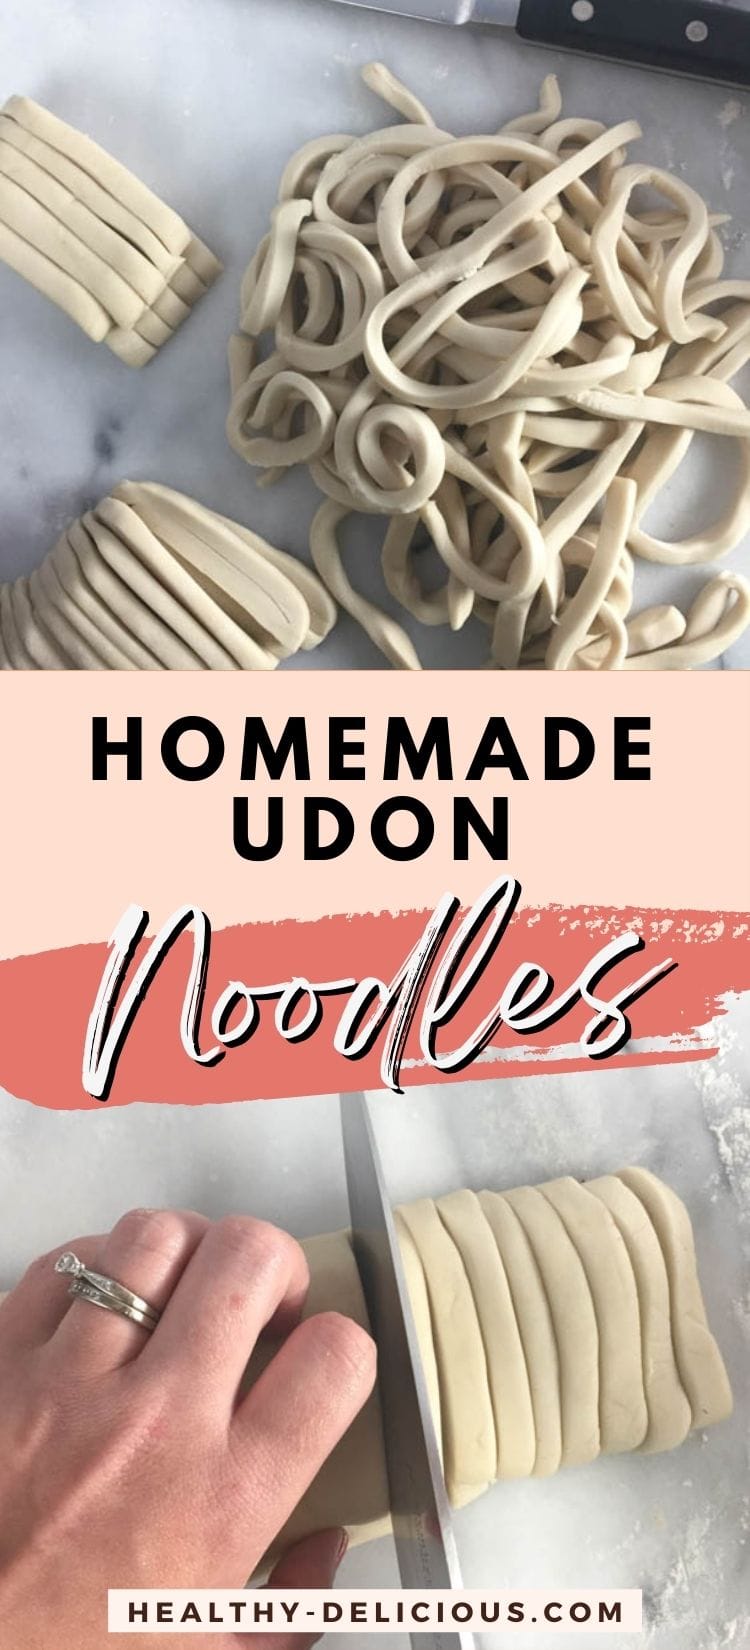 Making your own udon noodles is easier than you might think, and the results are well worth it! These noodles are made with wheat flour and salt, and can be served hot or cold with dipping sauce. They're perfect for a quick and easy meal and give you a taste of Japan right in your own kitchen! via @HealthyDelish